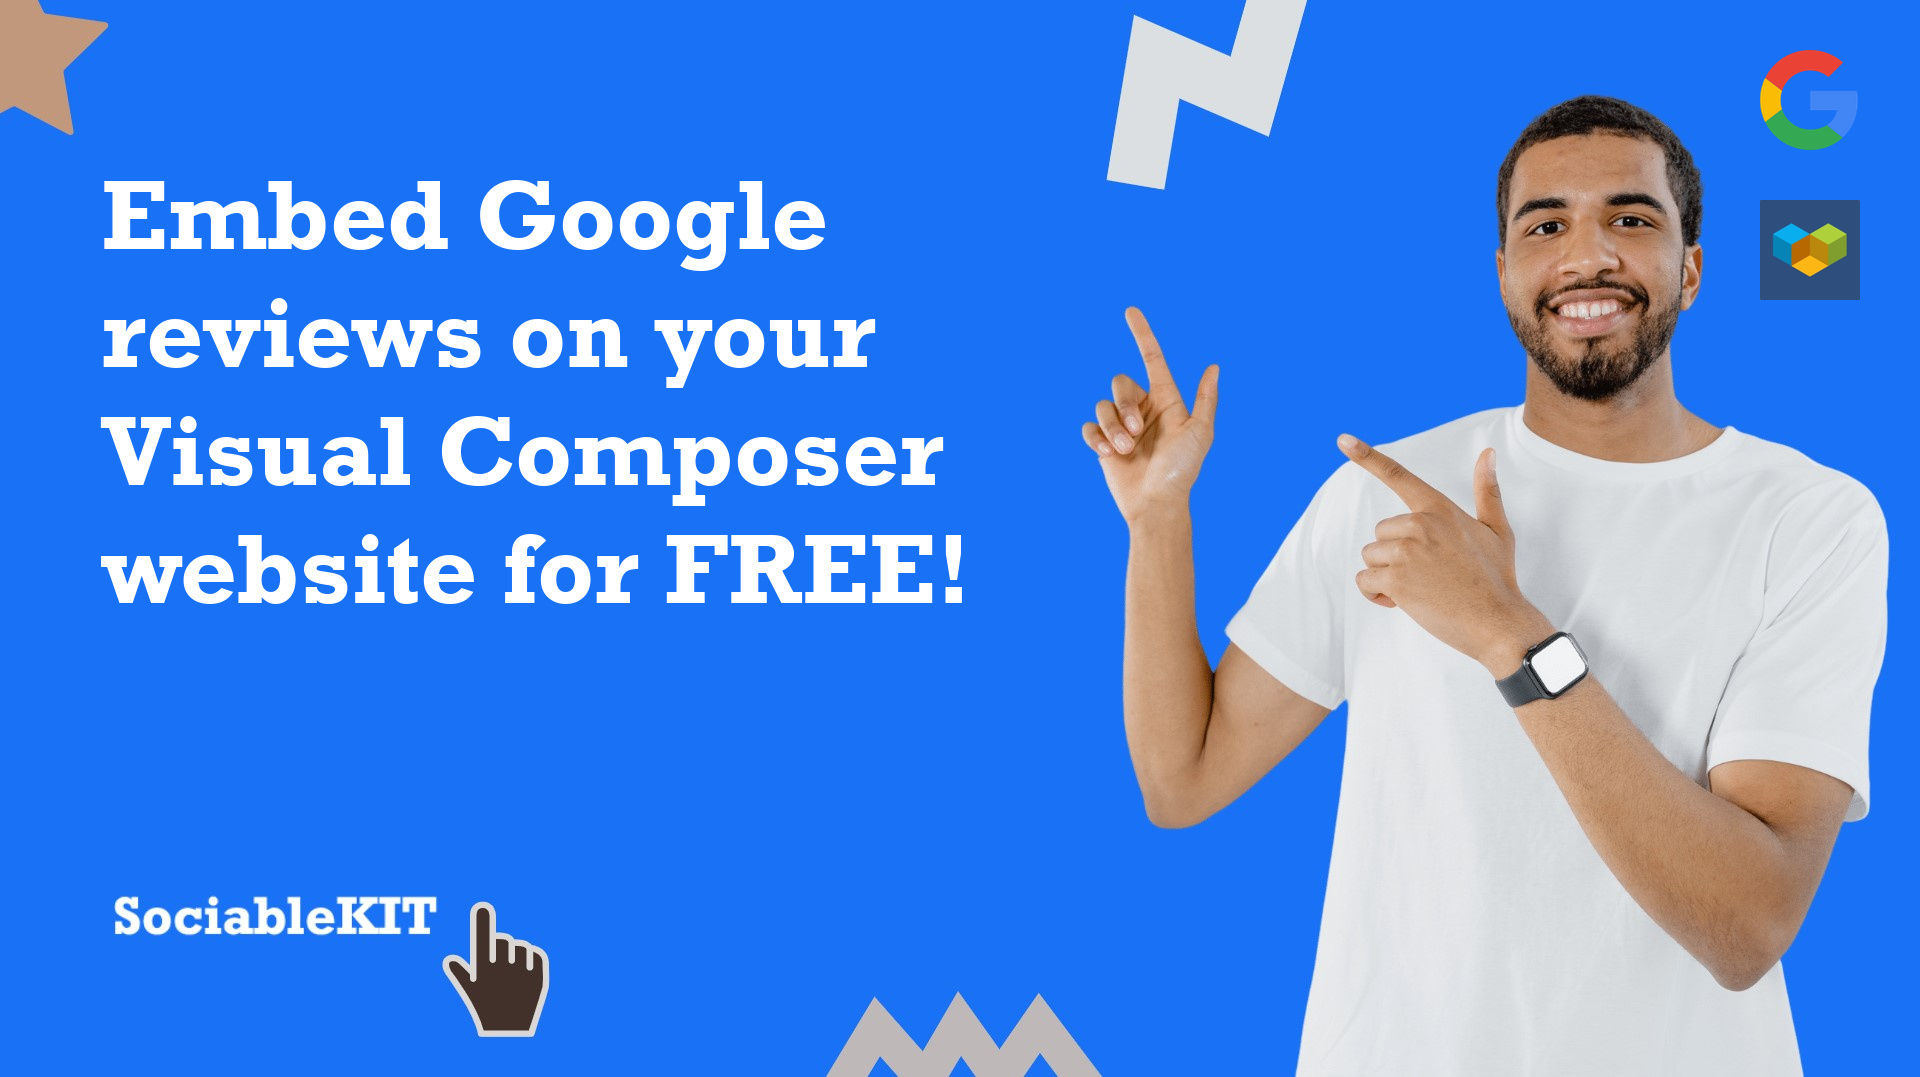 How to embed Google reviews on your Visual Composer website for FREE?